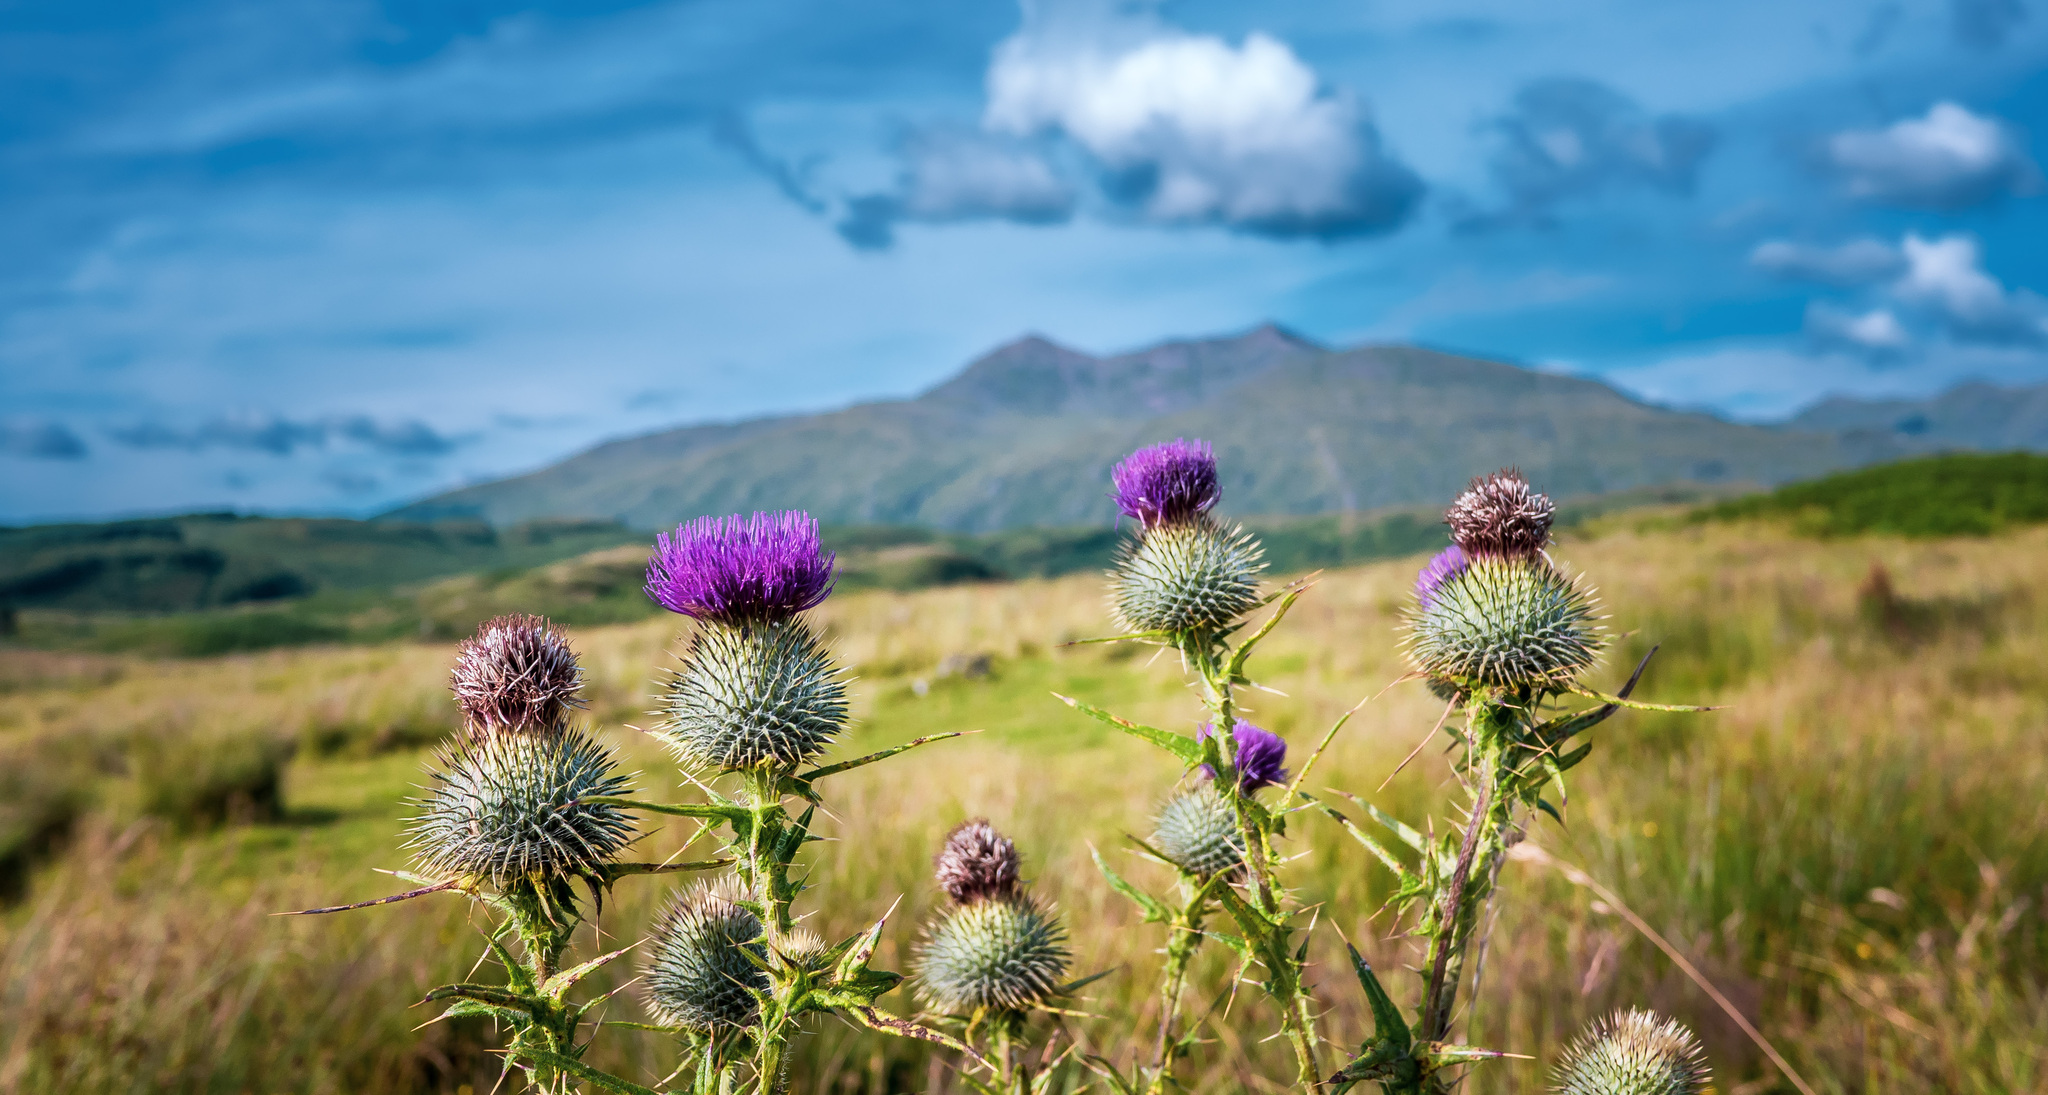 Thistles against the backdrop of Ben Cruachan.